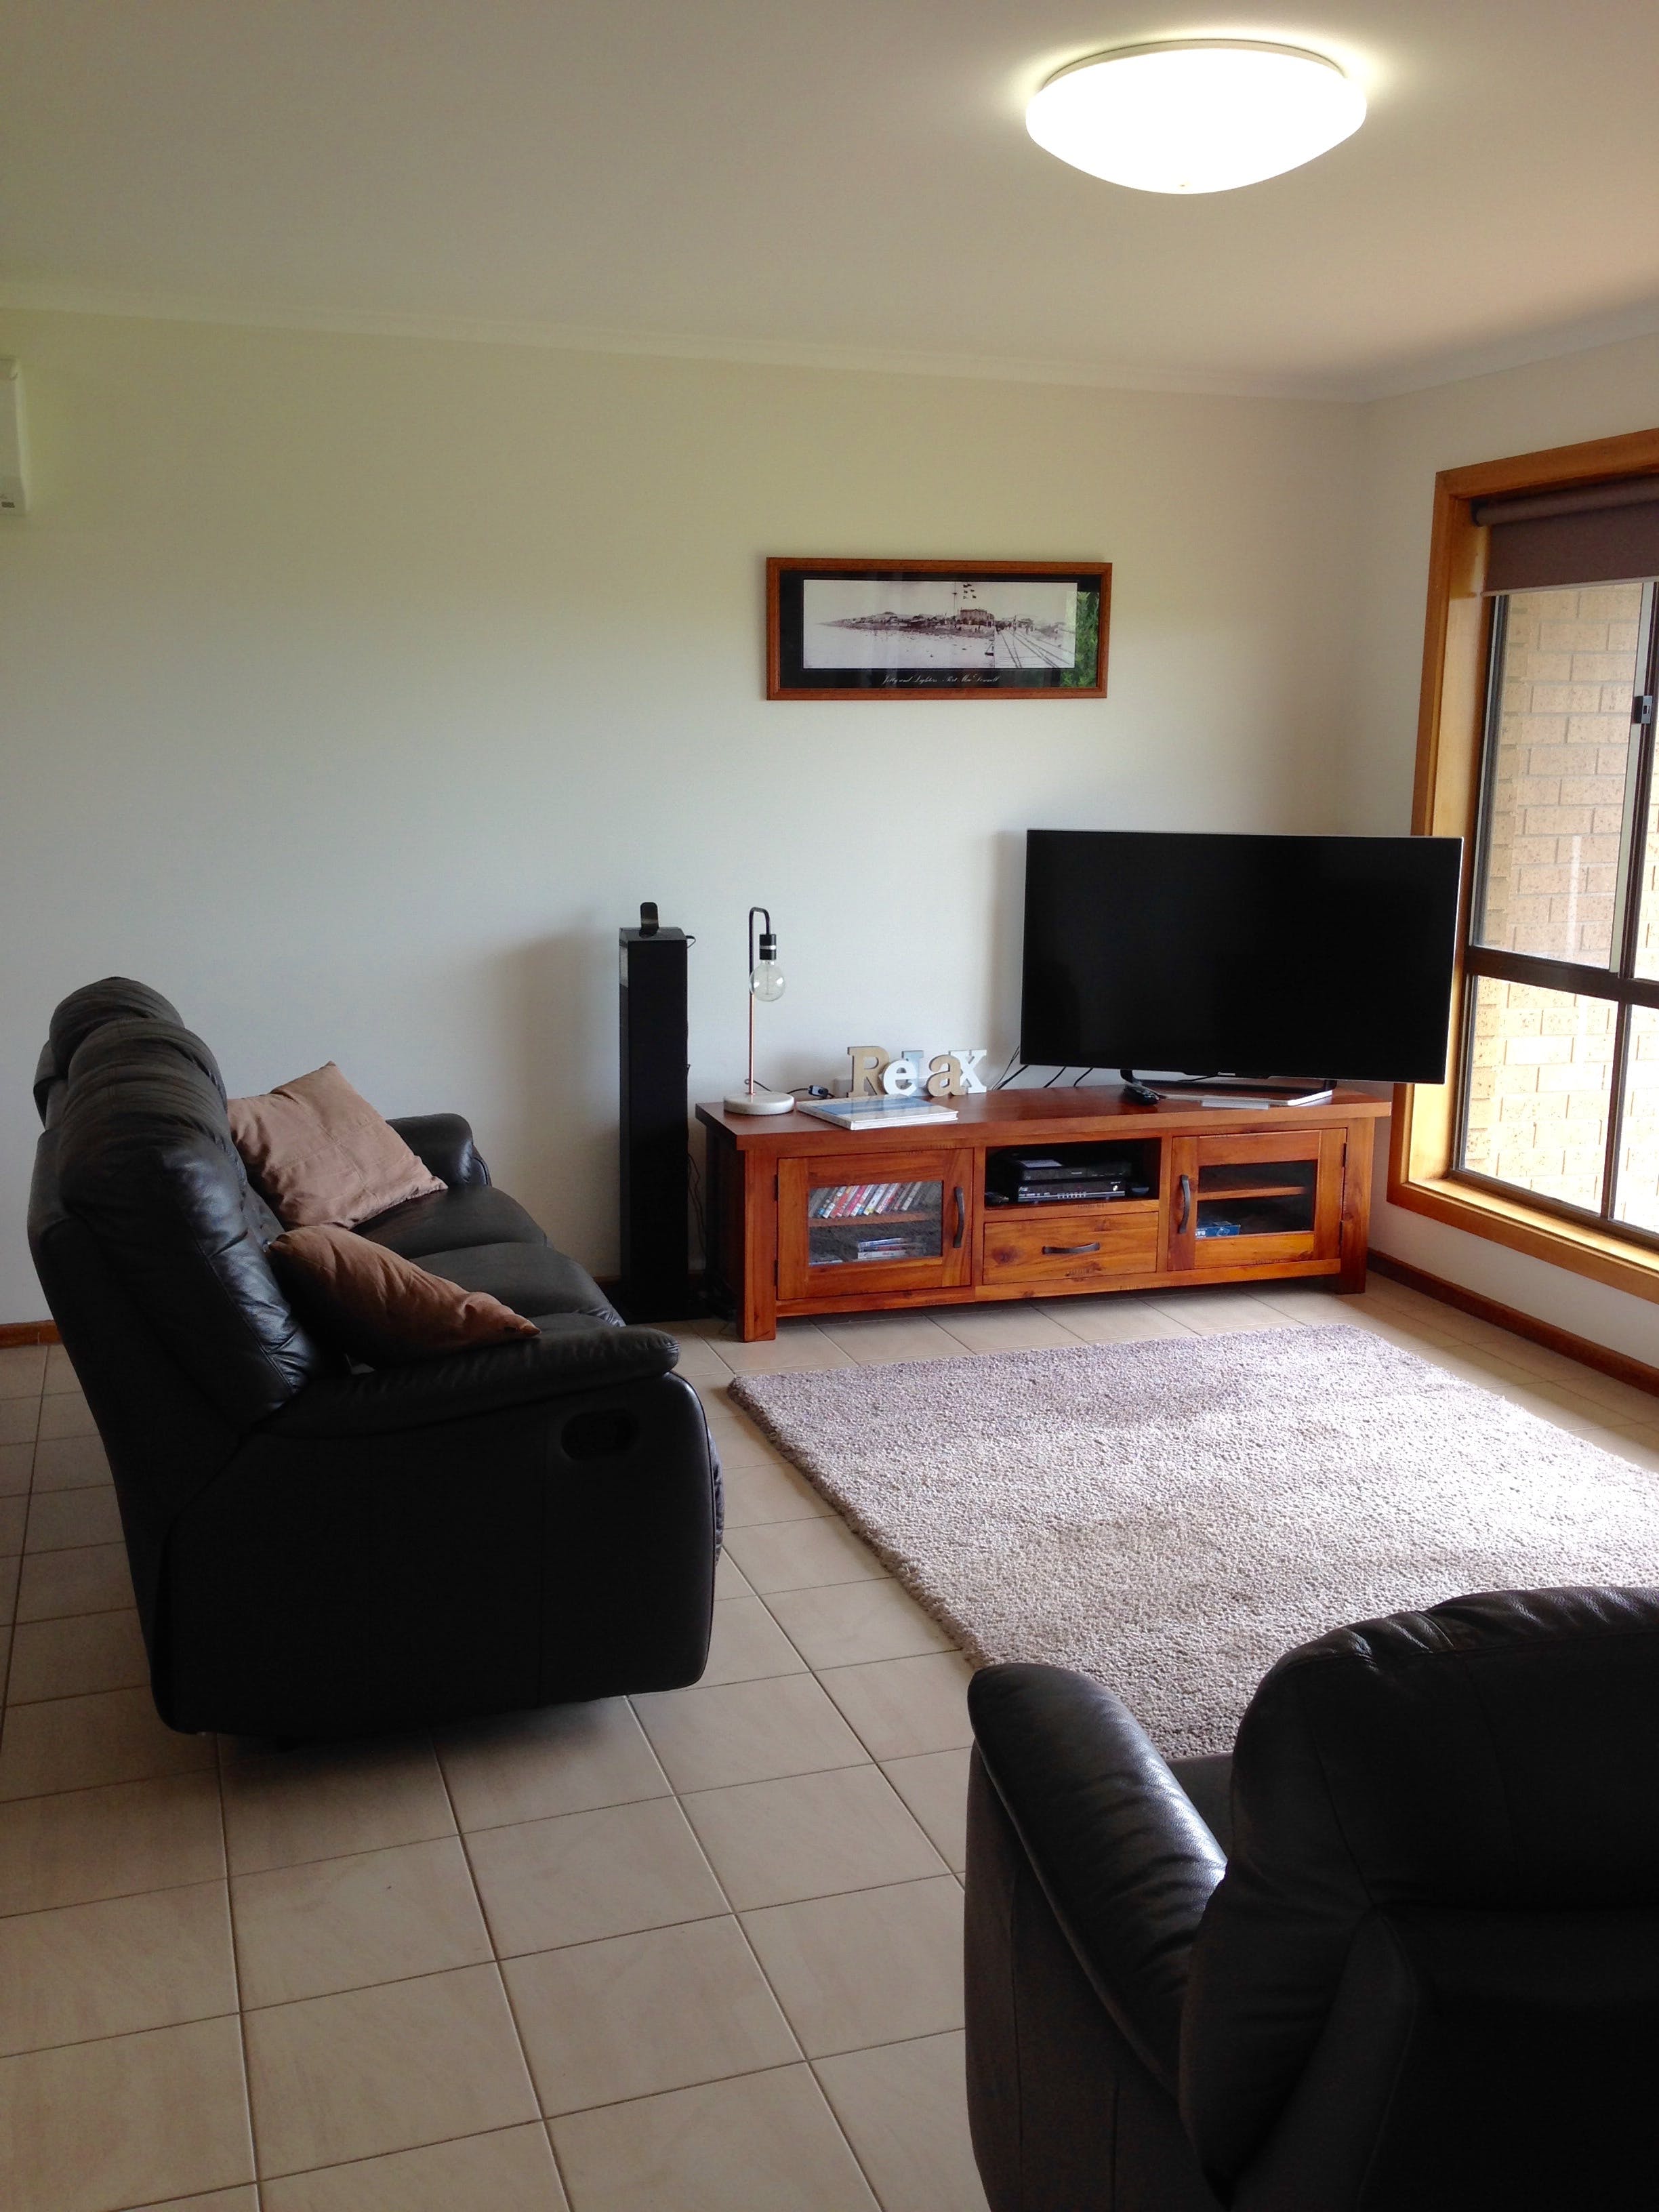 Springs Beach House - Redcliffe Tourism